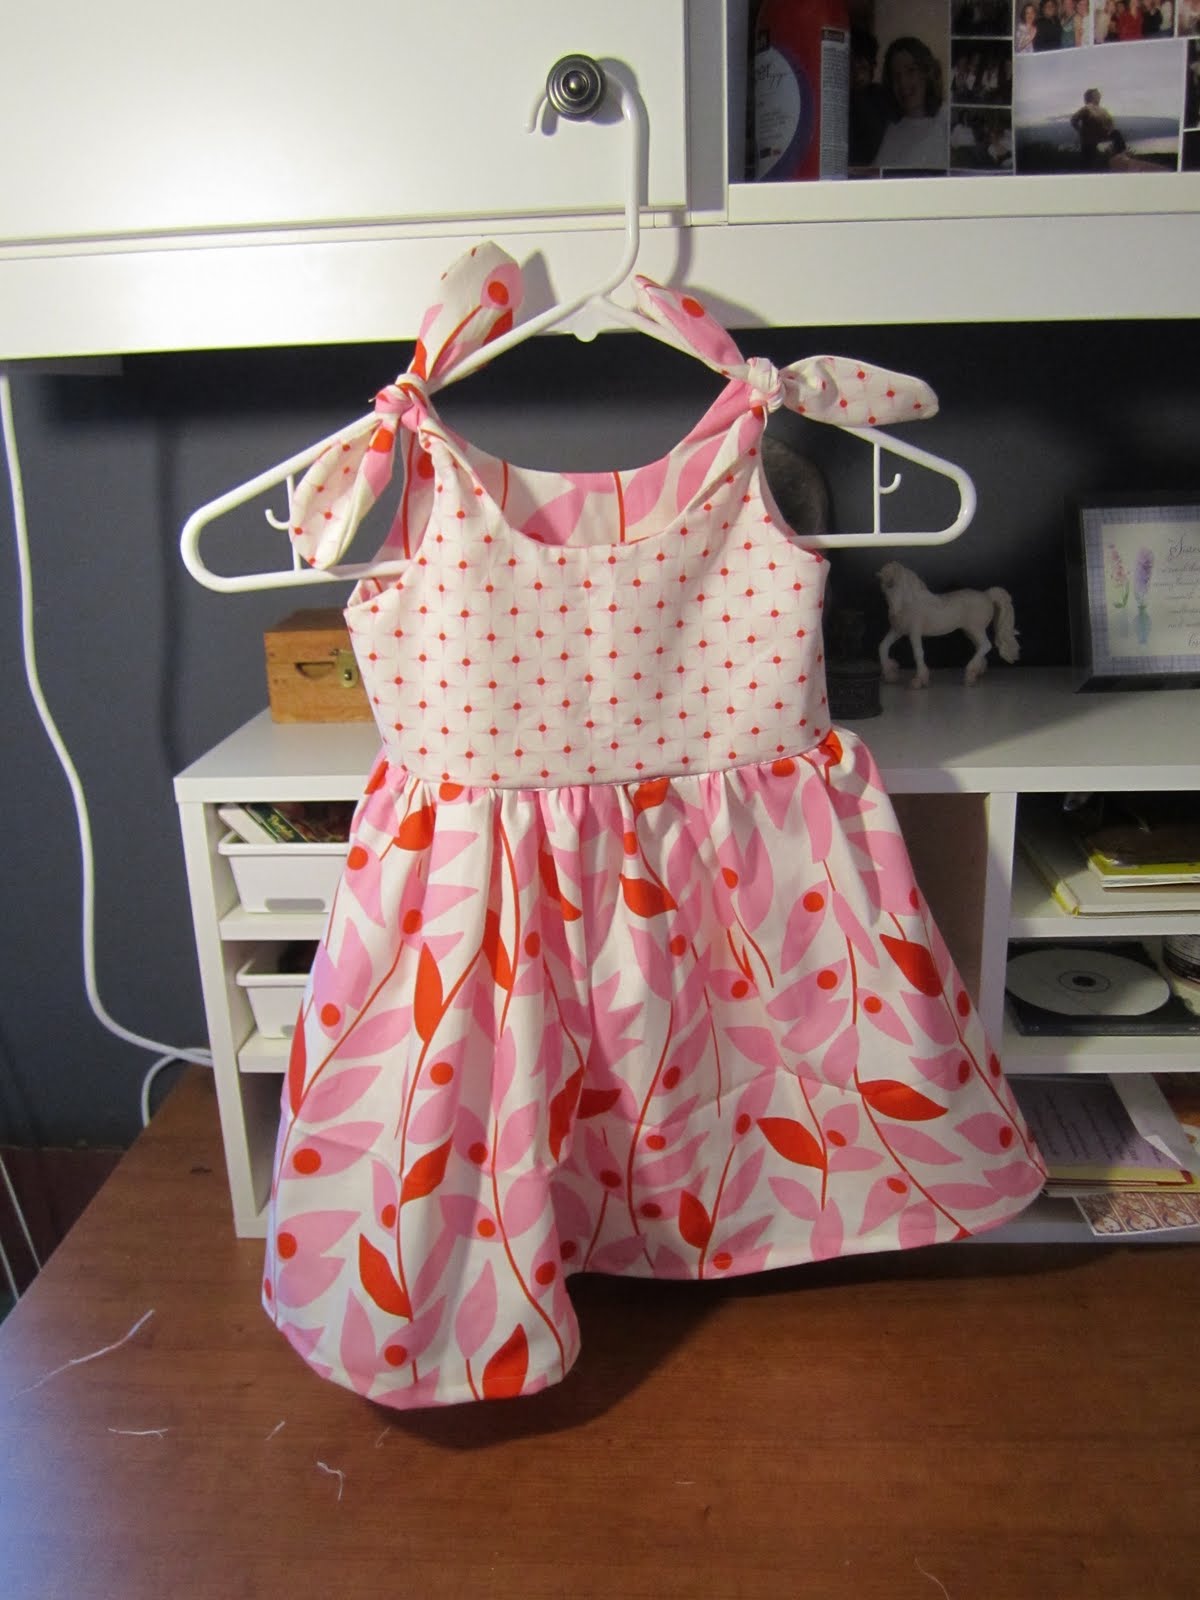 Knot Sew Easy...: Itty Bitty Dress - Pattern from Made by Rae